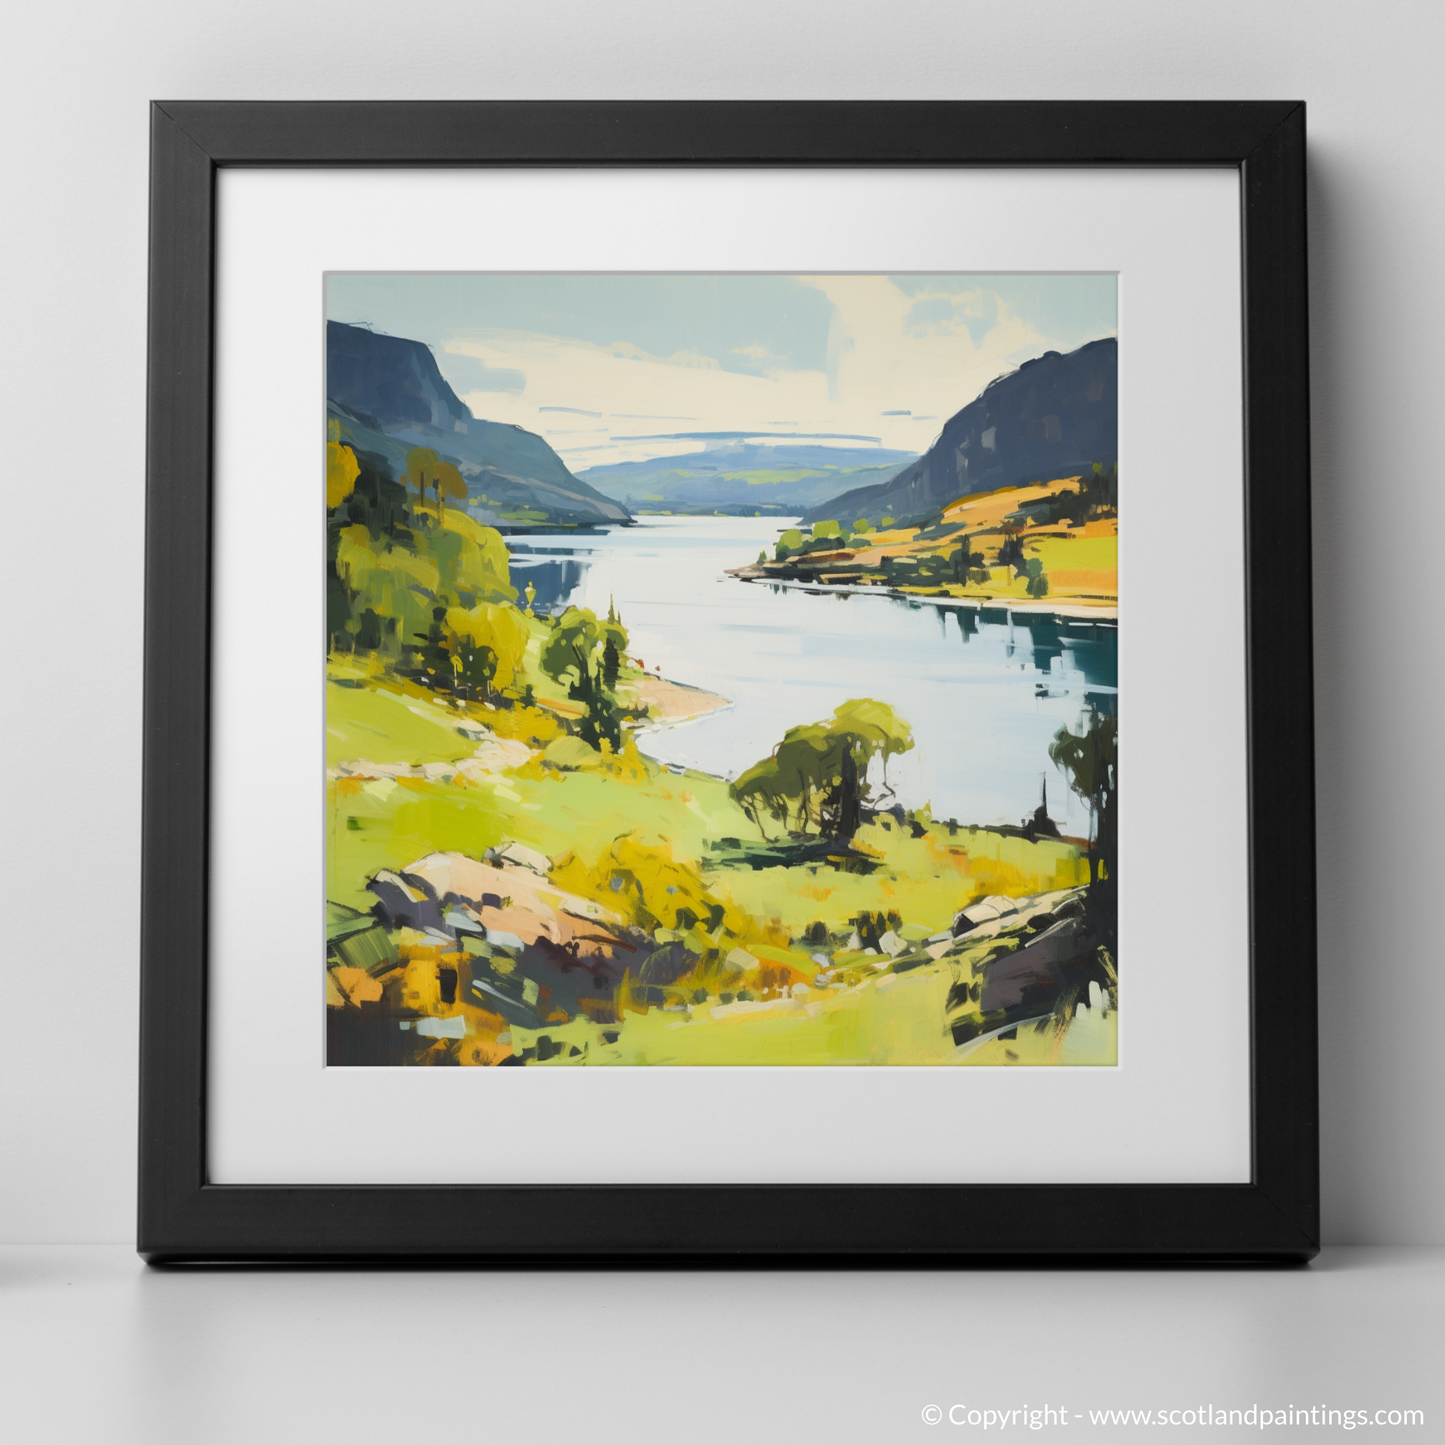 Painting and Art Print of Loch Ness, Highlands in summer. Summer Serenade in the Scottish Highlands.